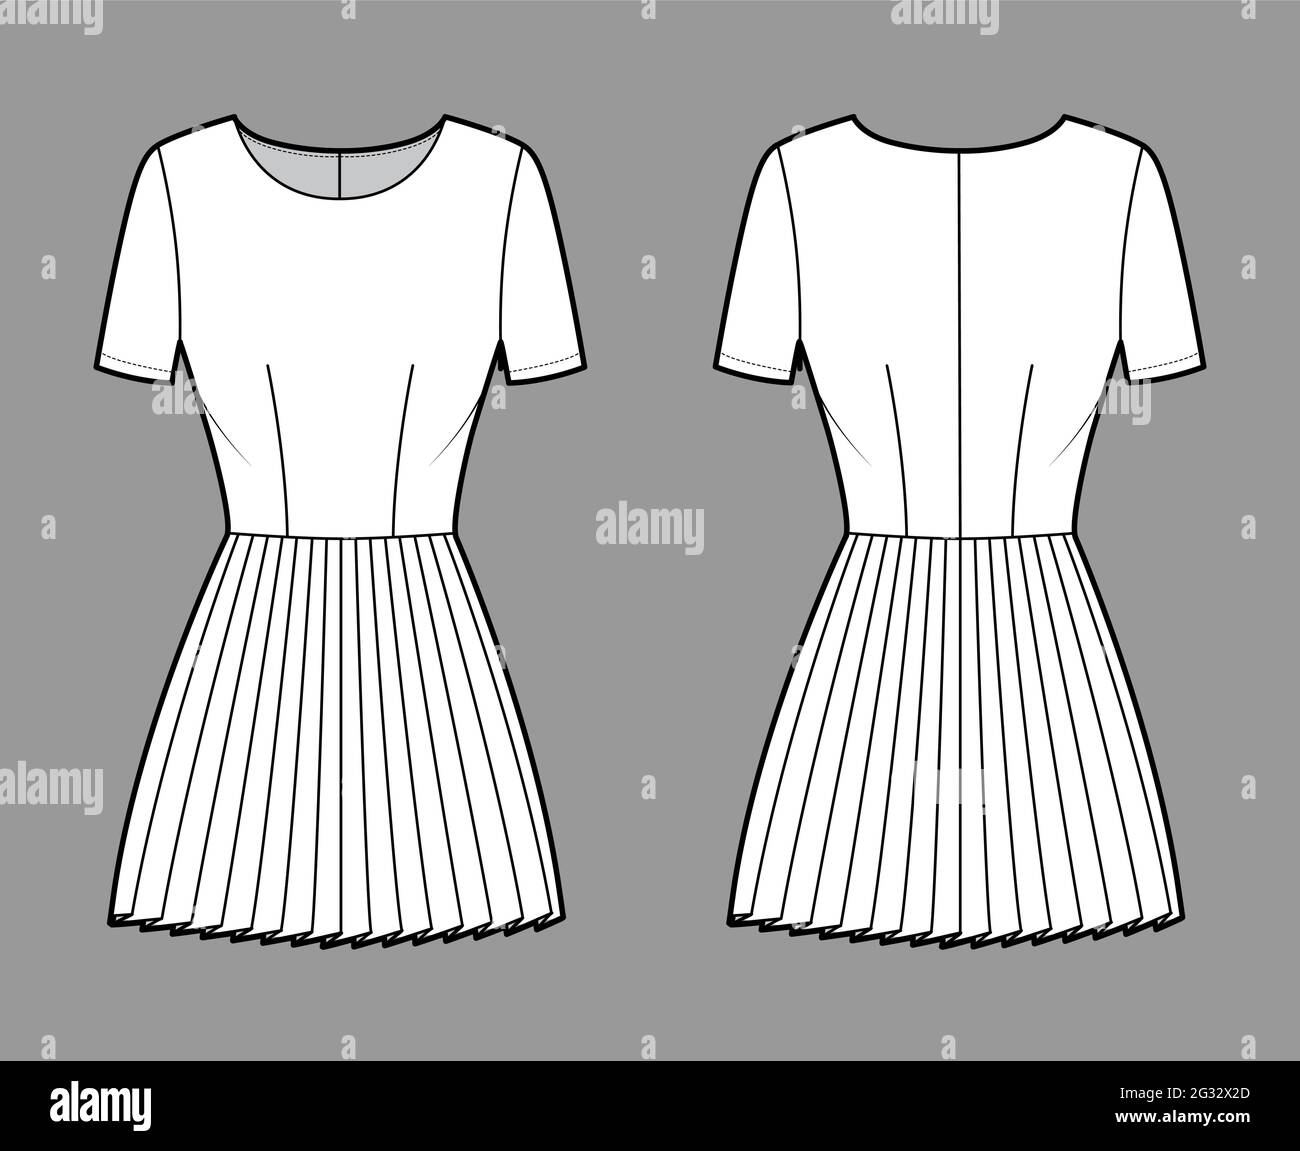 Dress pleated technical fashion illustration with short sleeves, fitted ...